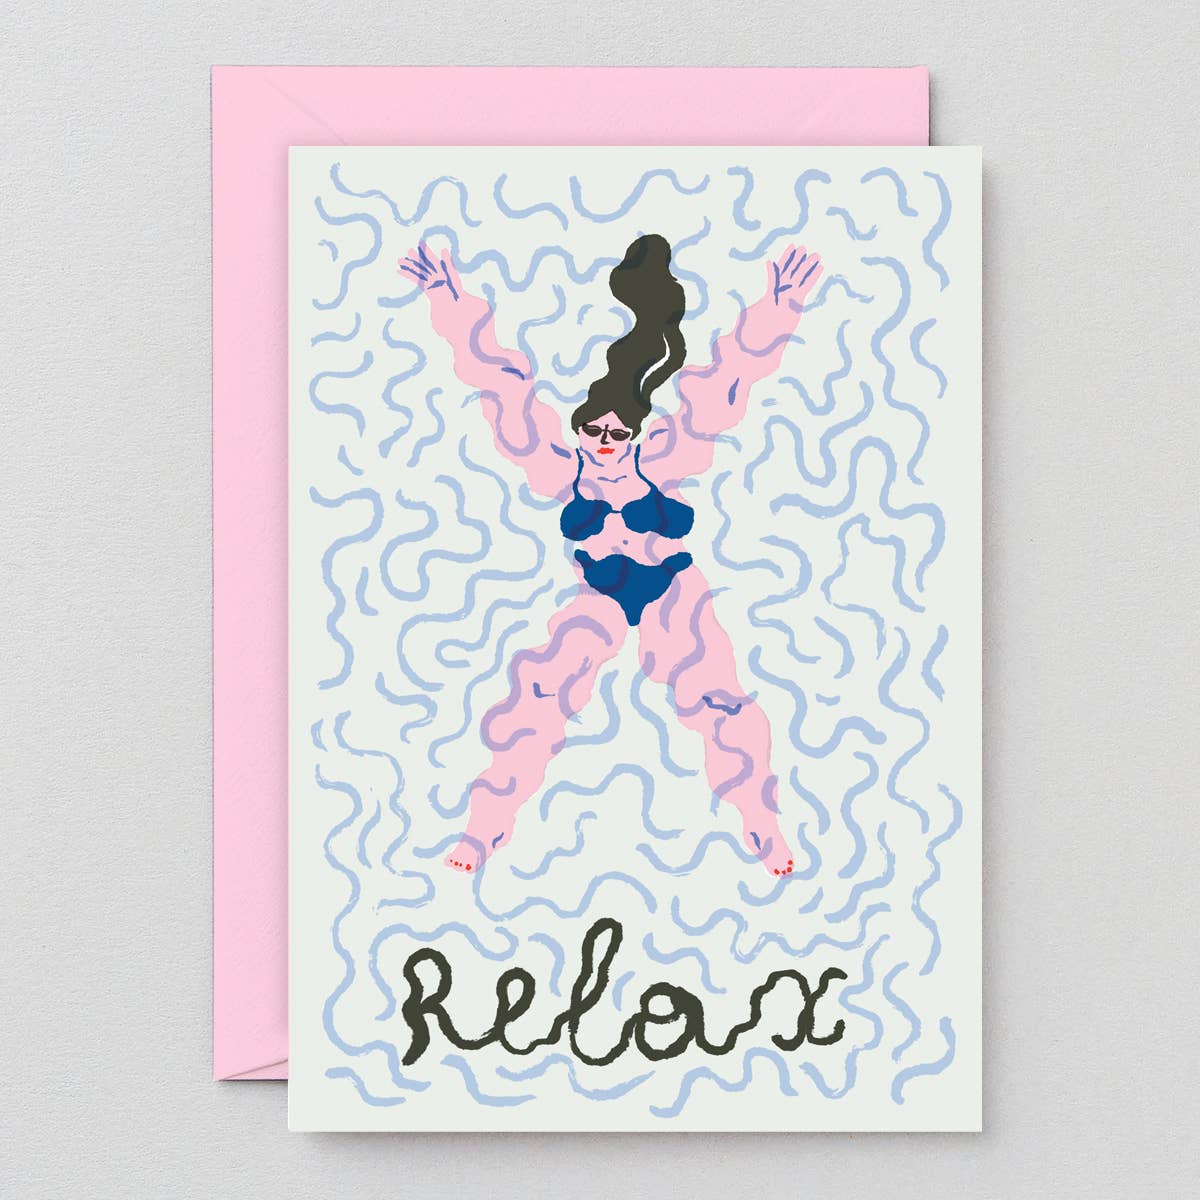 Wrap Cards - Relaxxxx Card - Moon Room Shop and Wellness